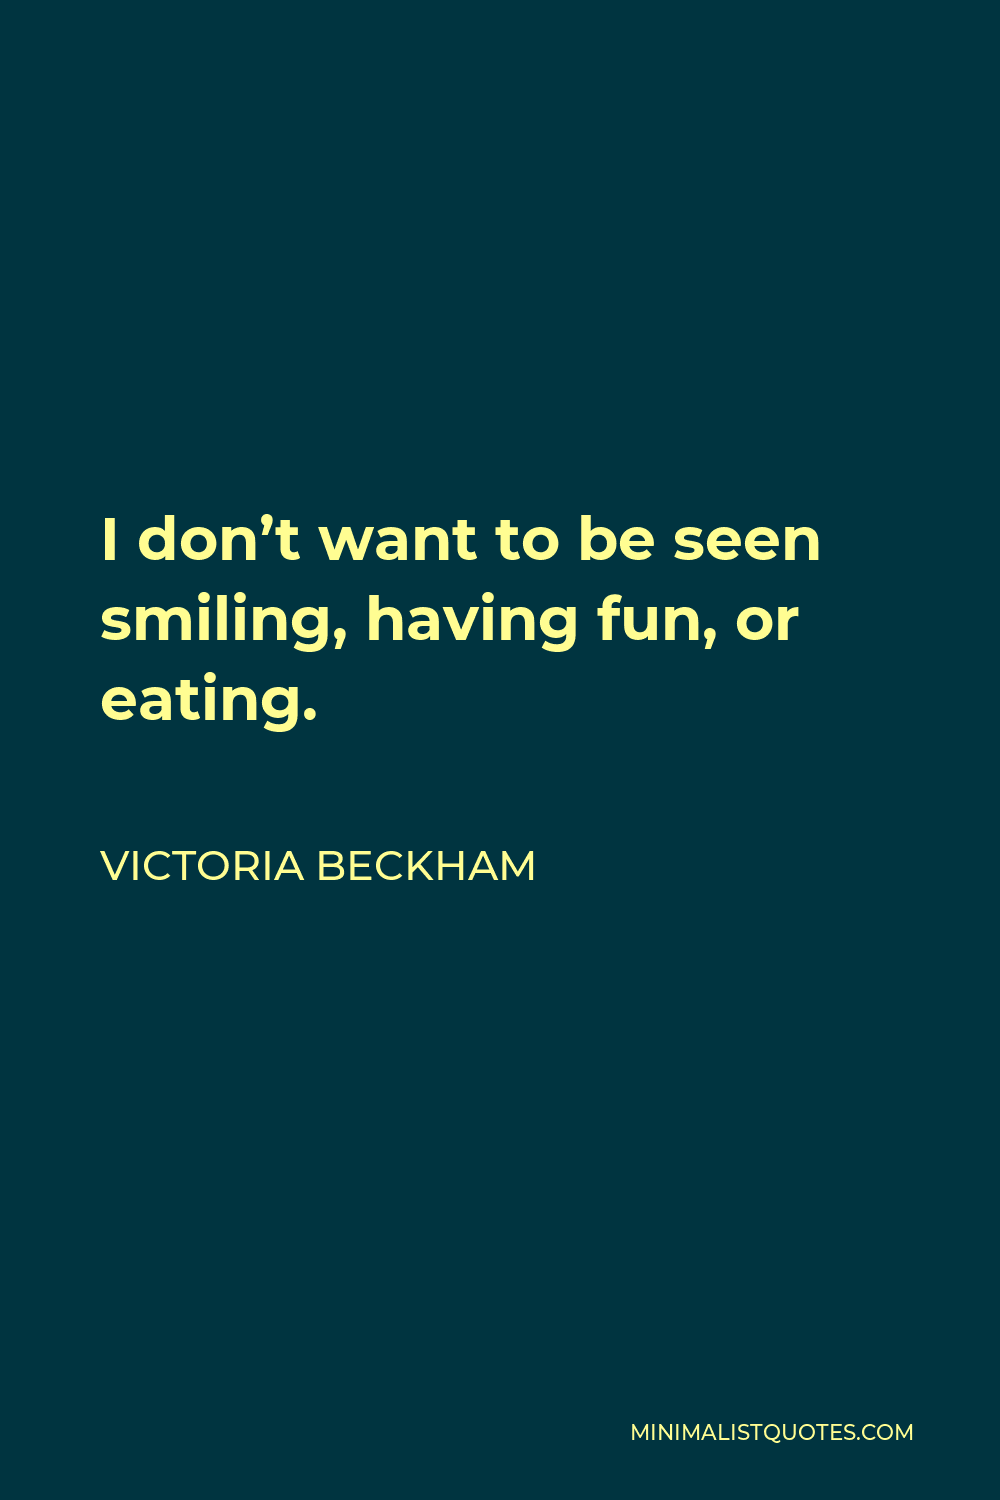 Victoria Beckham Quote - I don’t want to be seen smiling, having fun, or eating.